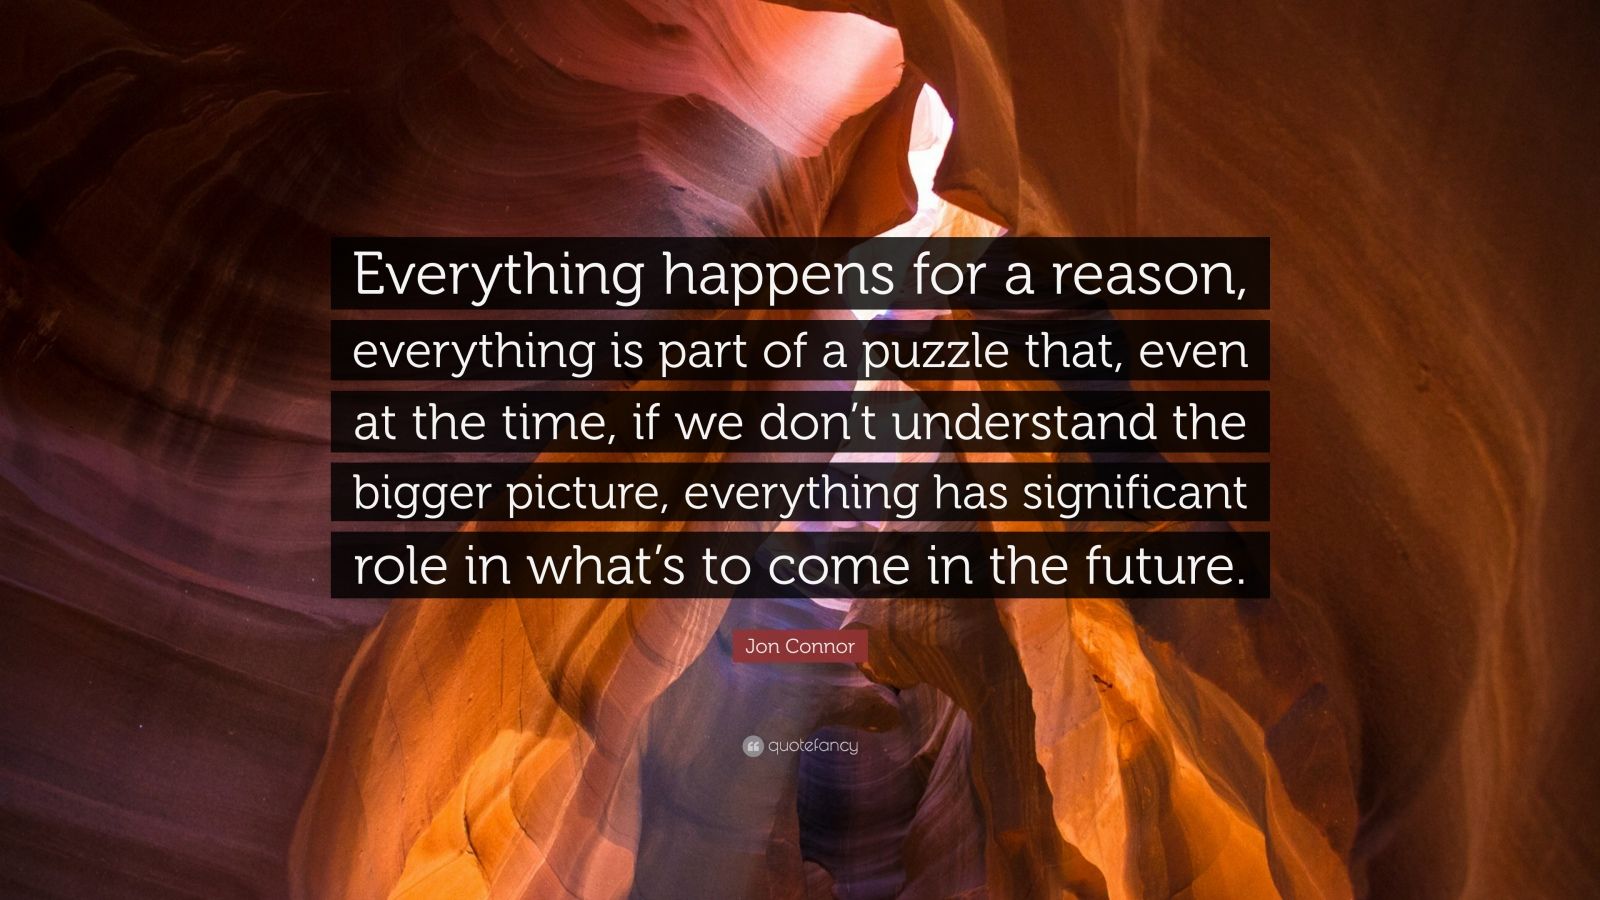 Jon Connor Quote: “Everything Happens For A Reason, Everything Is Part